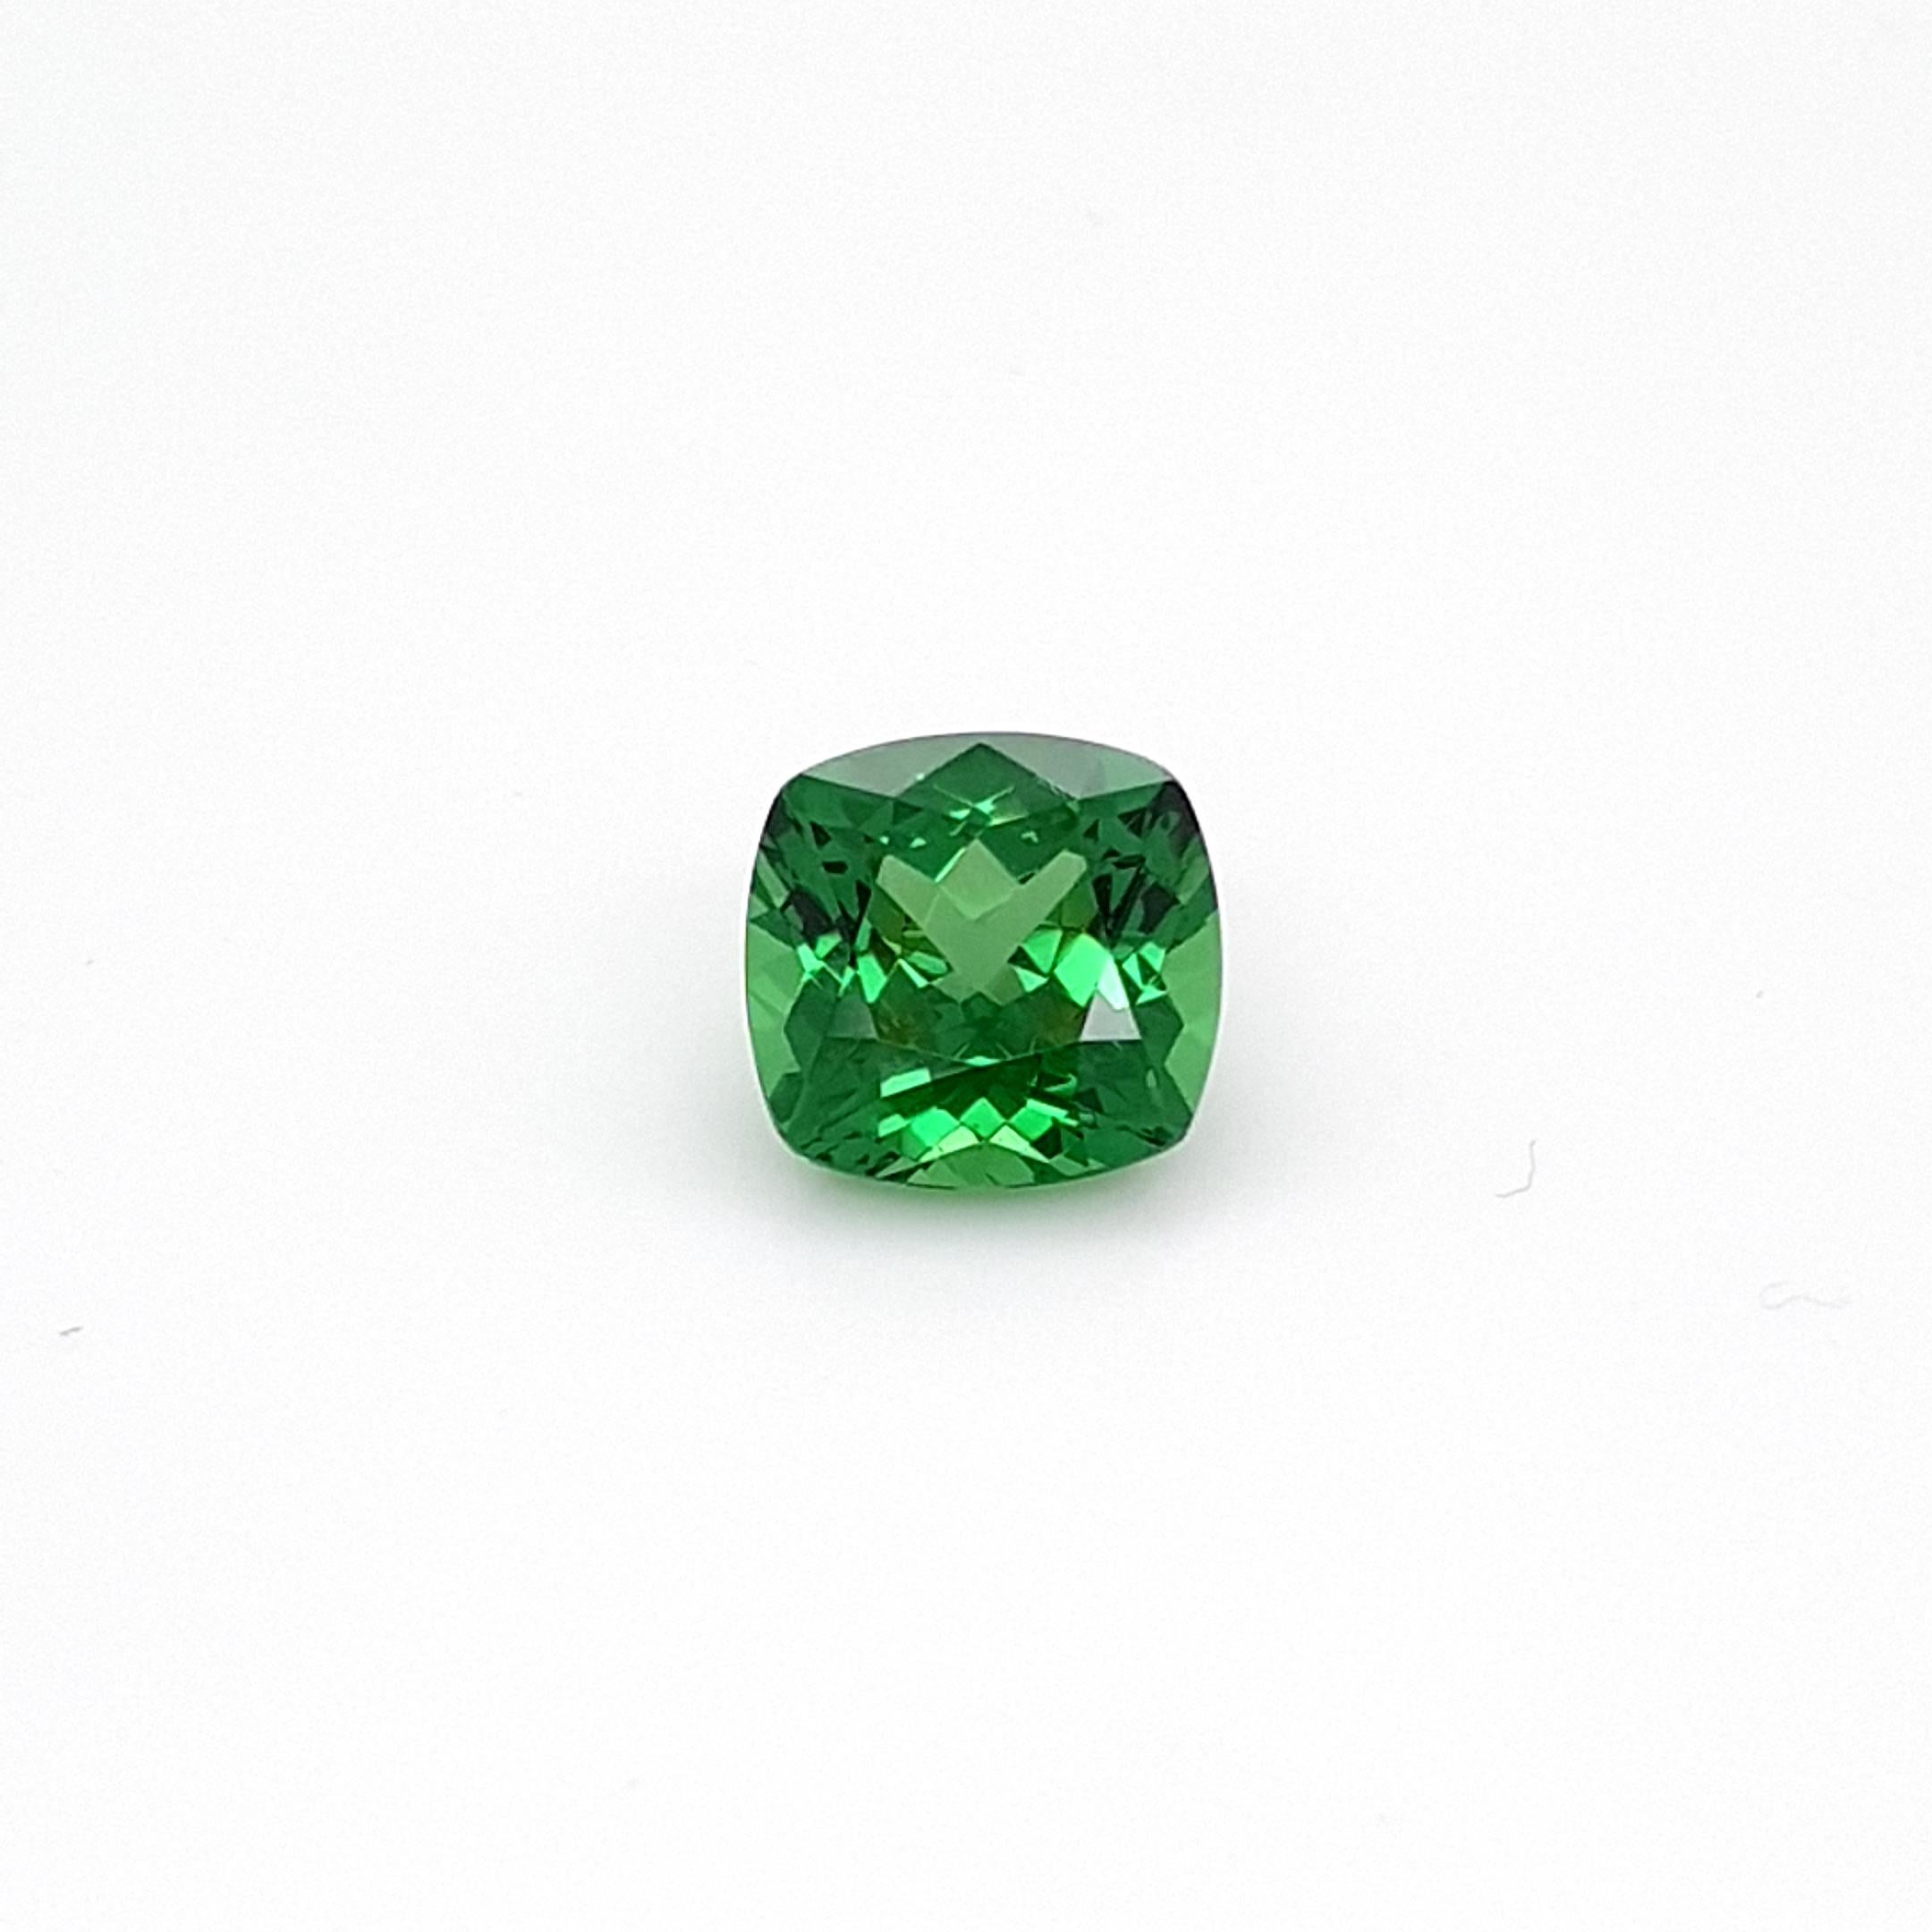 We are delighted to be able to offer for sale, this 4,61 ct. Tsavorite Garnet from our exclusive collection.
This beautiful rare gem has a rich green green color and a great fire. Cutting, proportion and cleaness enable an very high light return